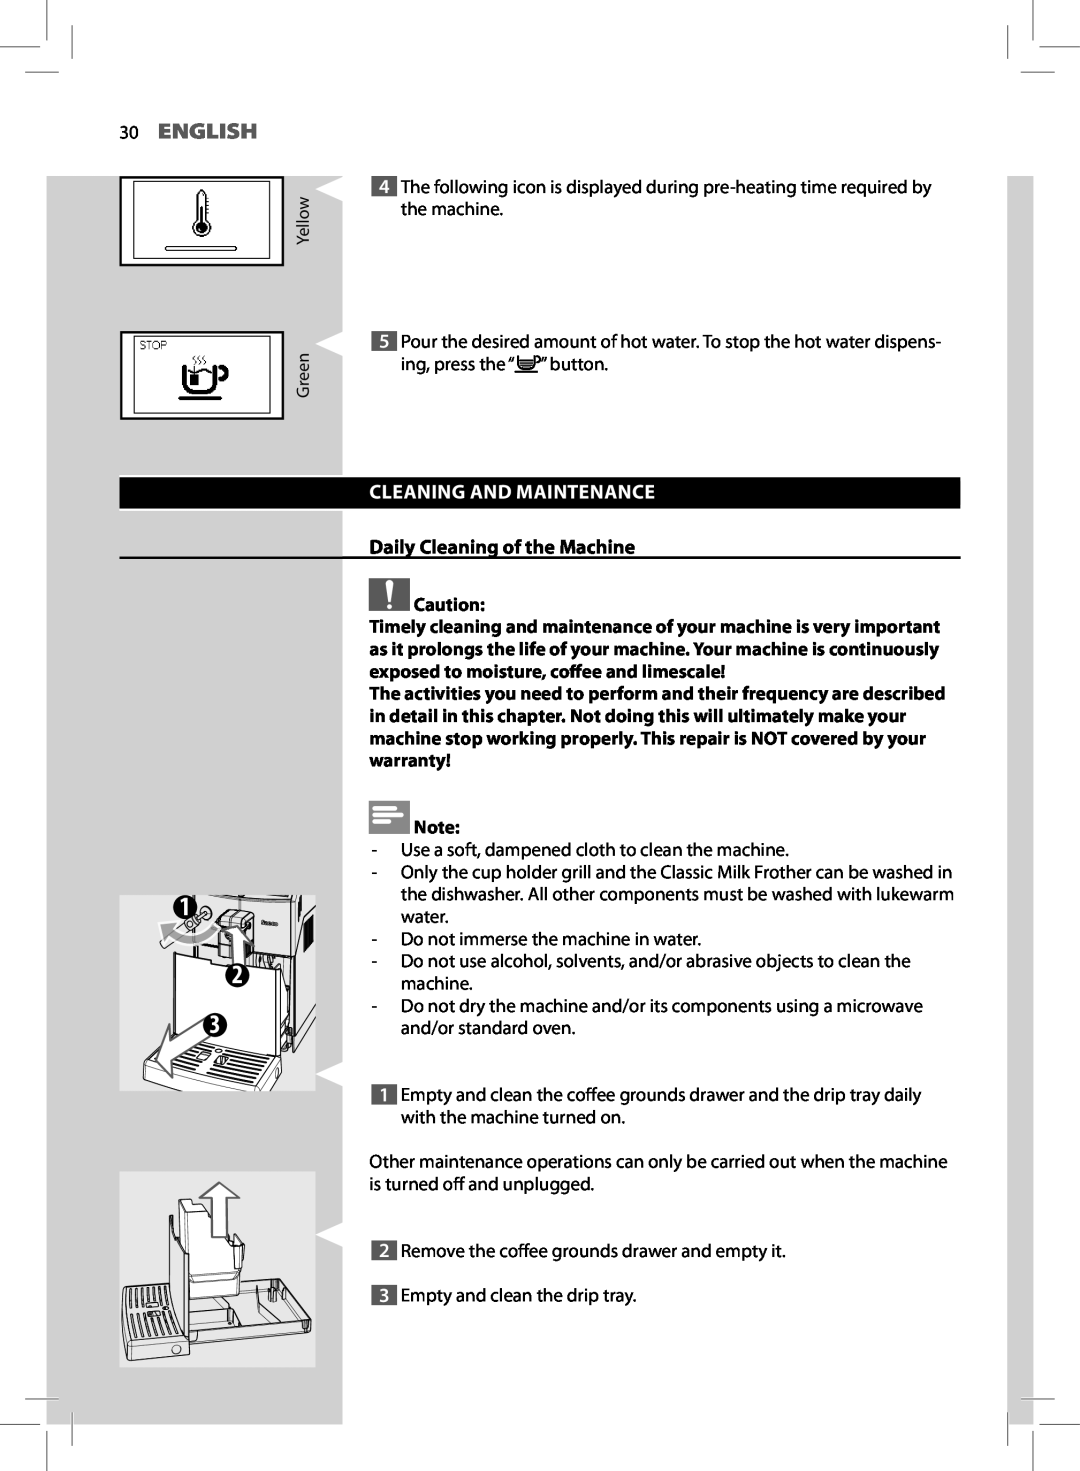 Saeco Coffee Makers HD8775 user manual 30ENGLISH, Cleaning And Maintenance, Daily Cleaning of the Machine 